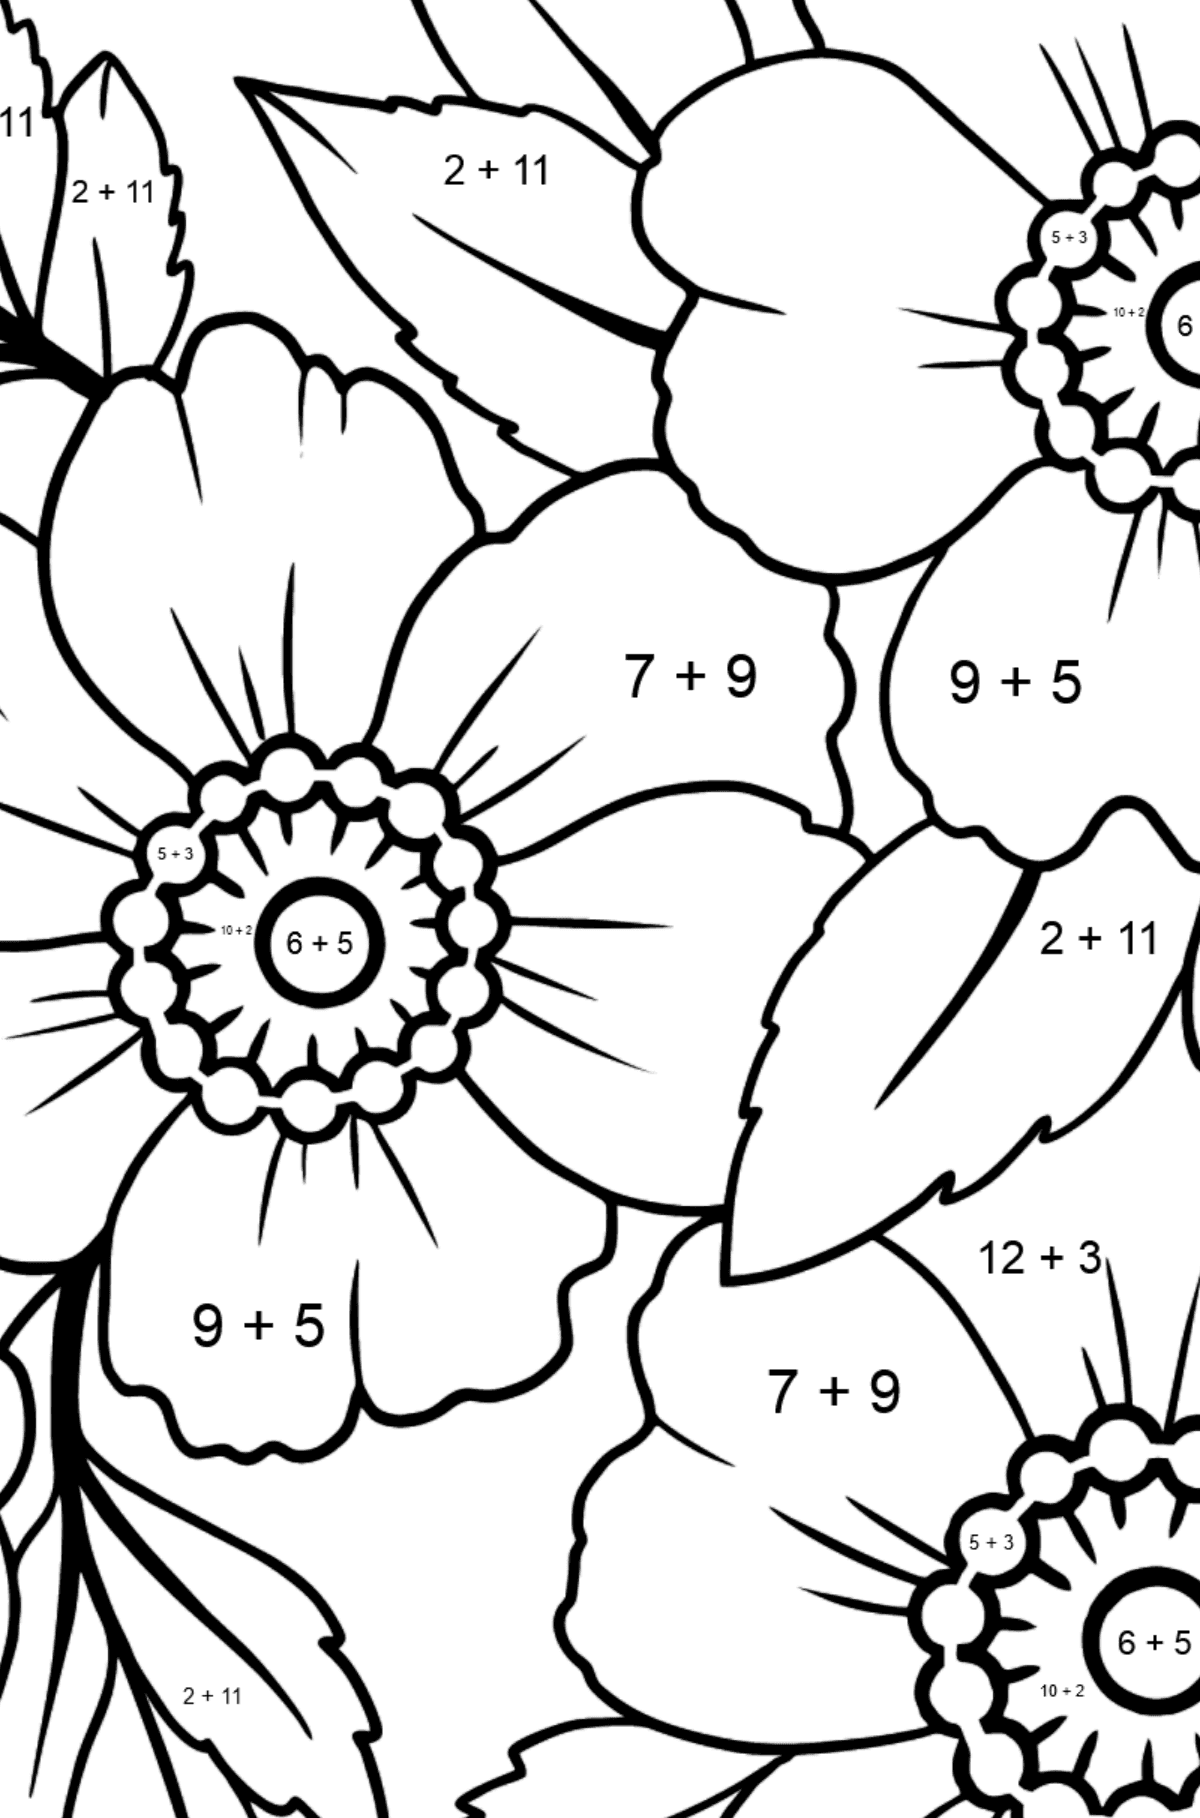 Flower Coloring Page - Japanese Anemone - Math Coloring - Addition for Kids